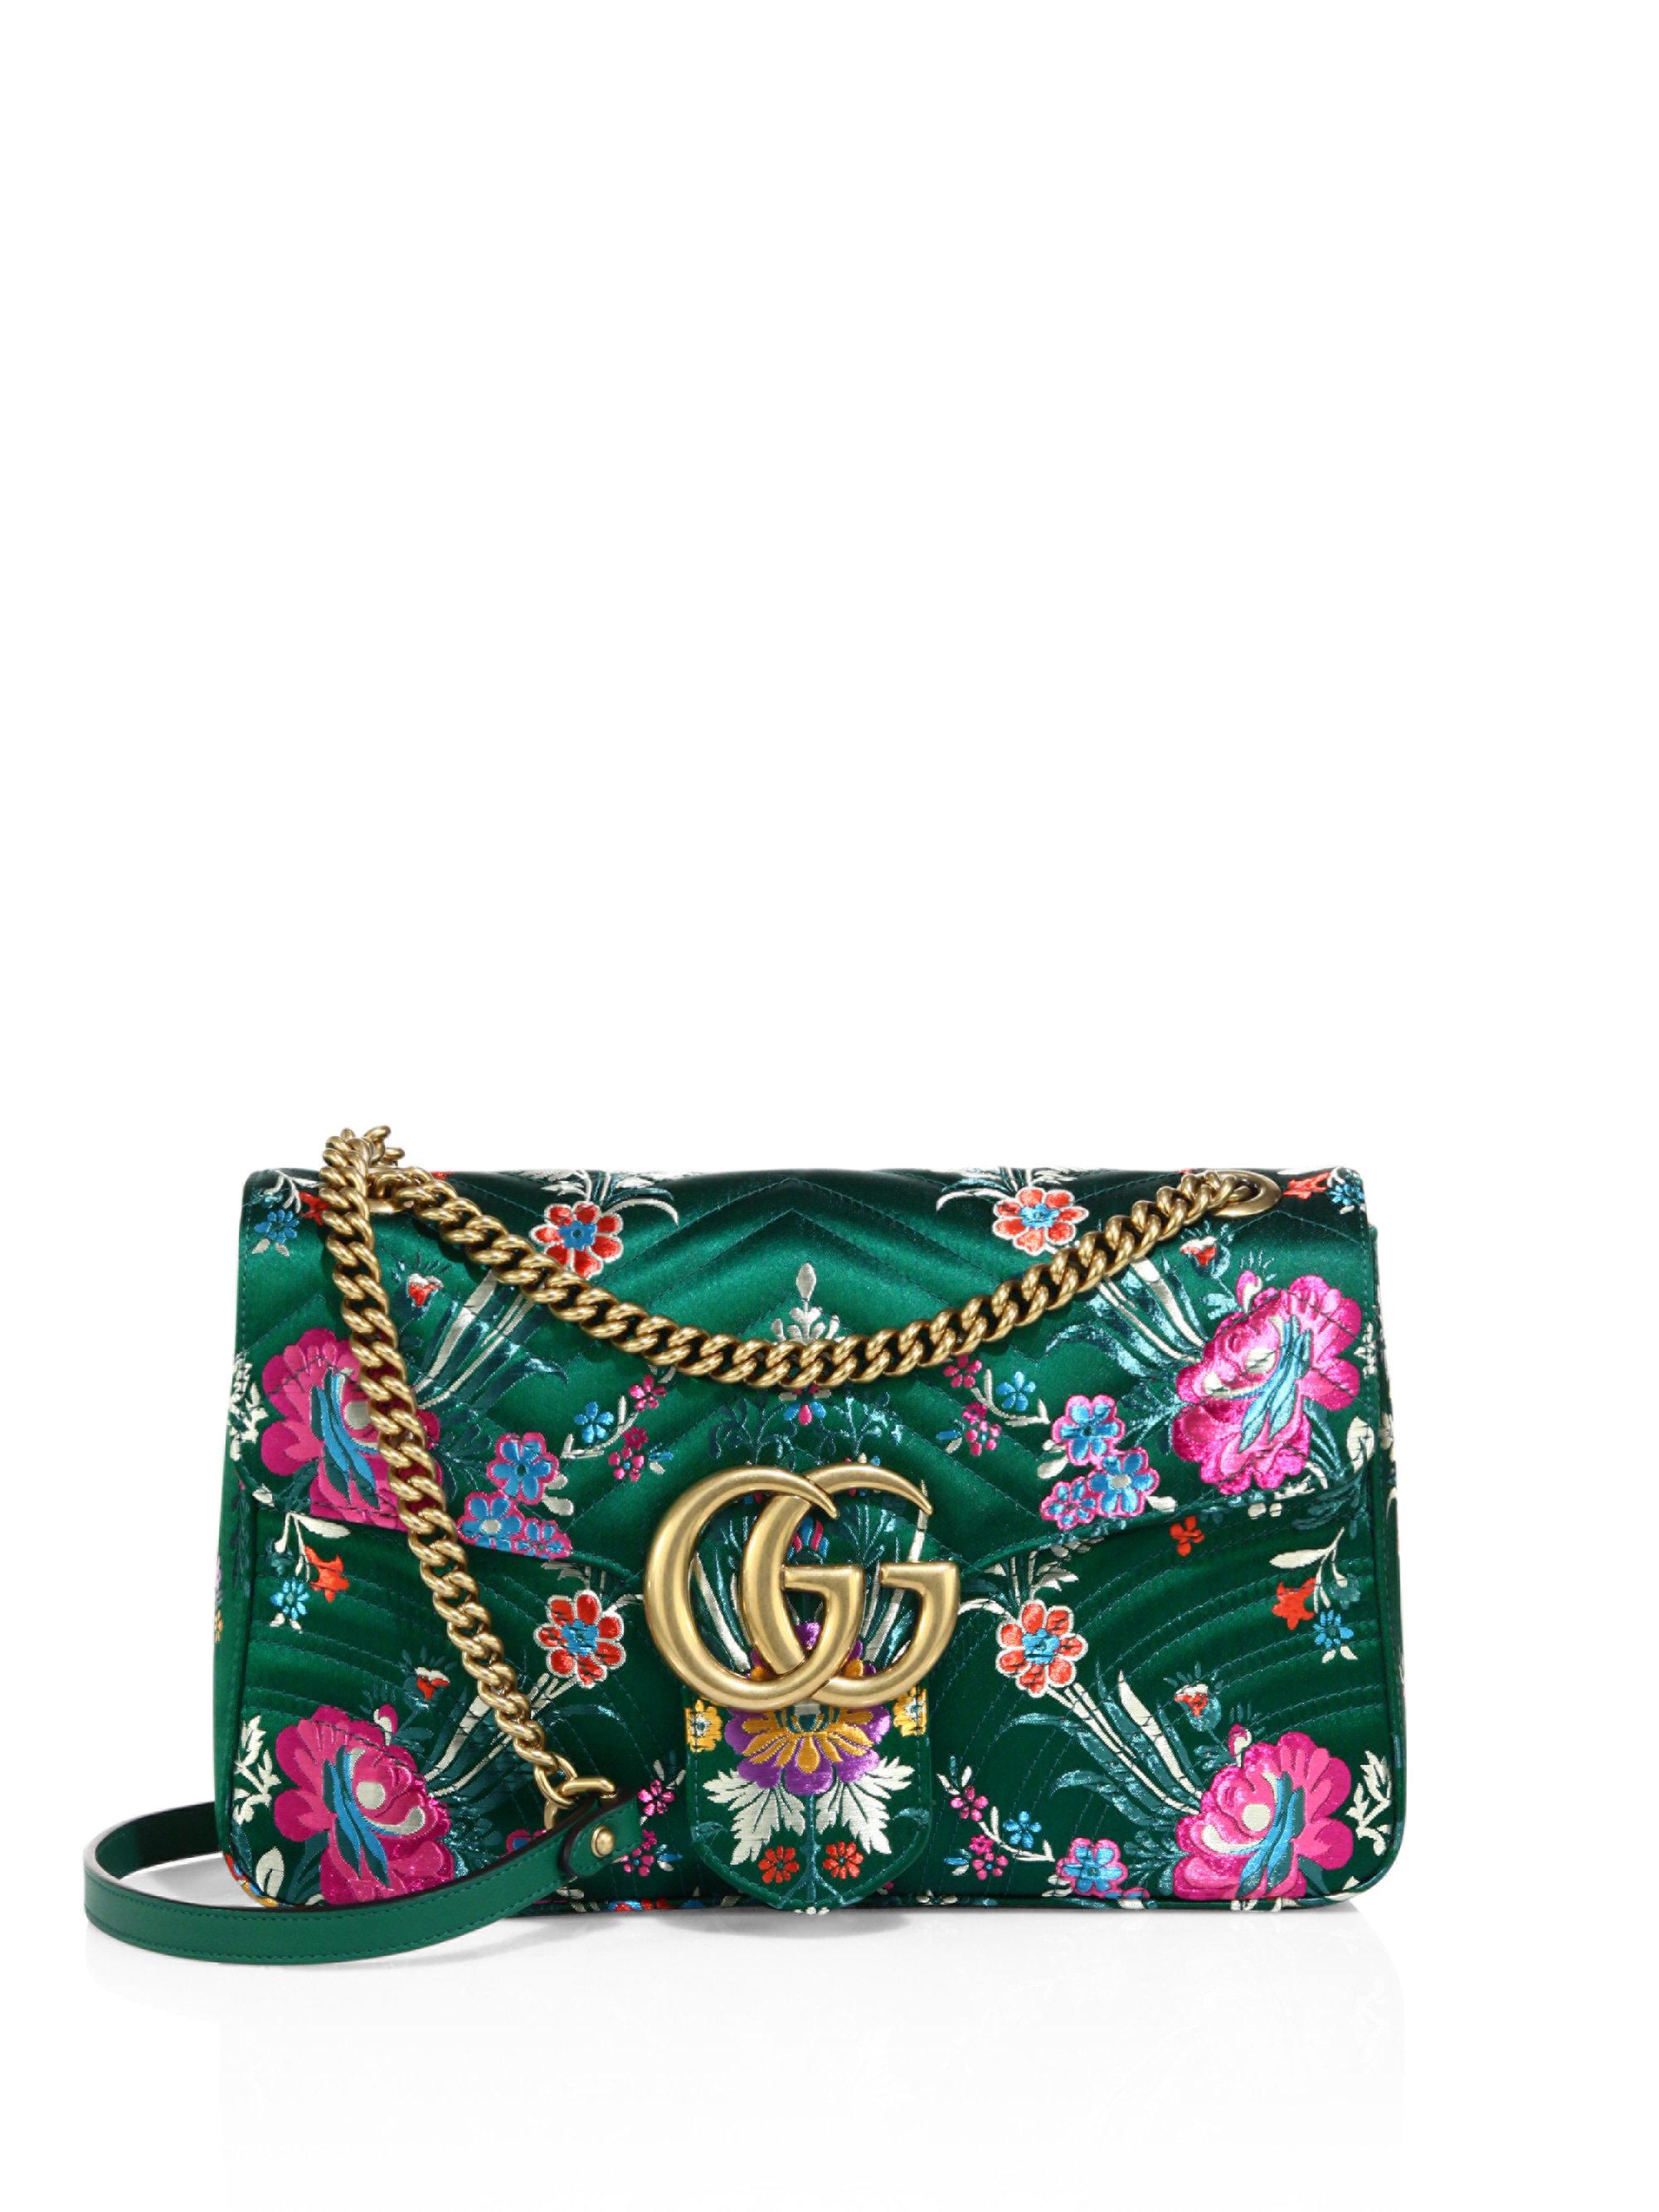 Gucci Small Gg Marmont Matelasse Floral Jacquard Chain Shoulder Bag in Green - Lyst